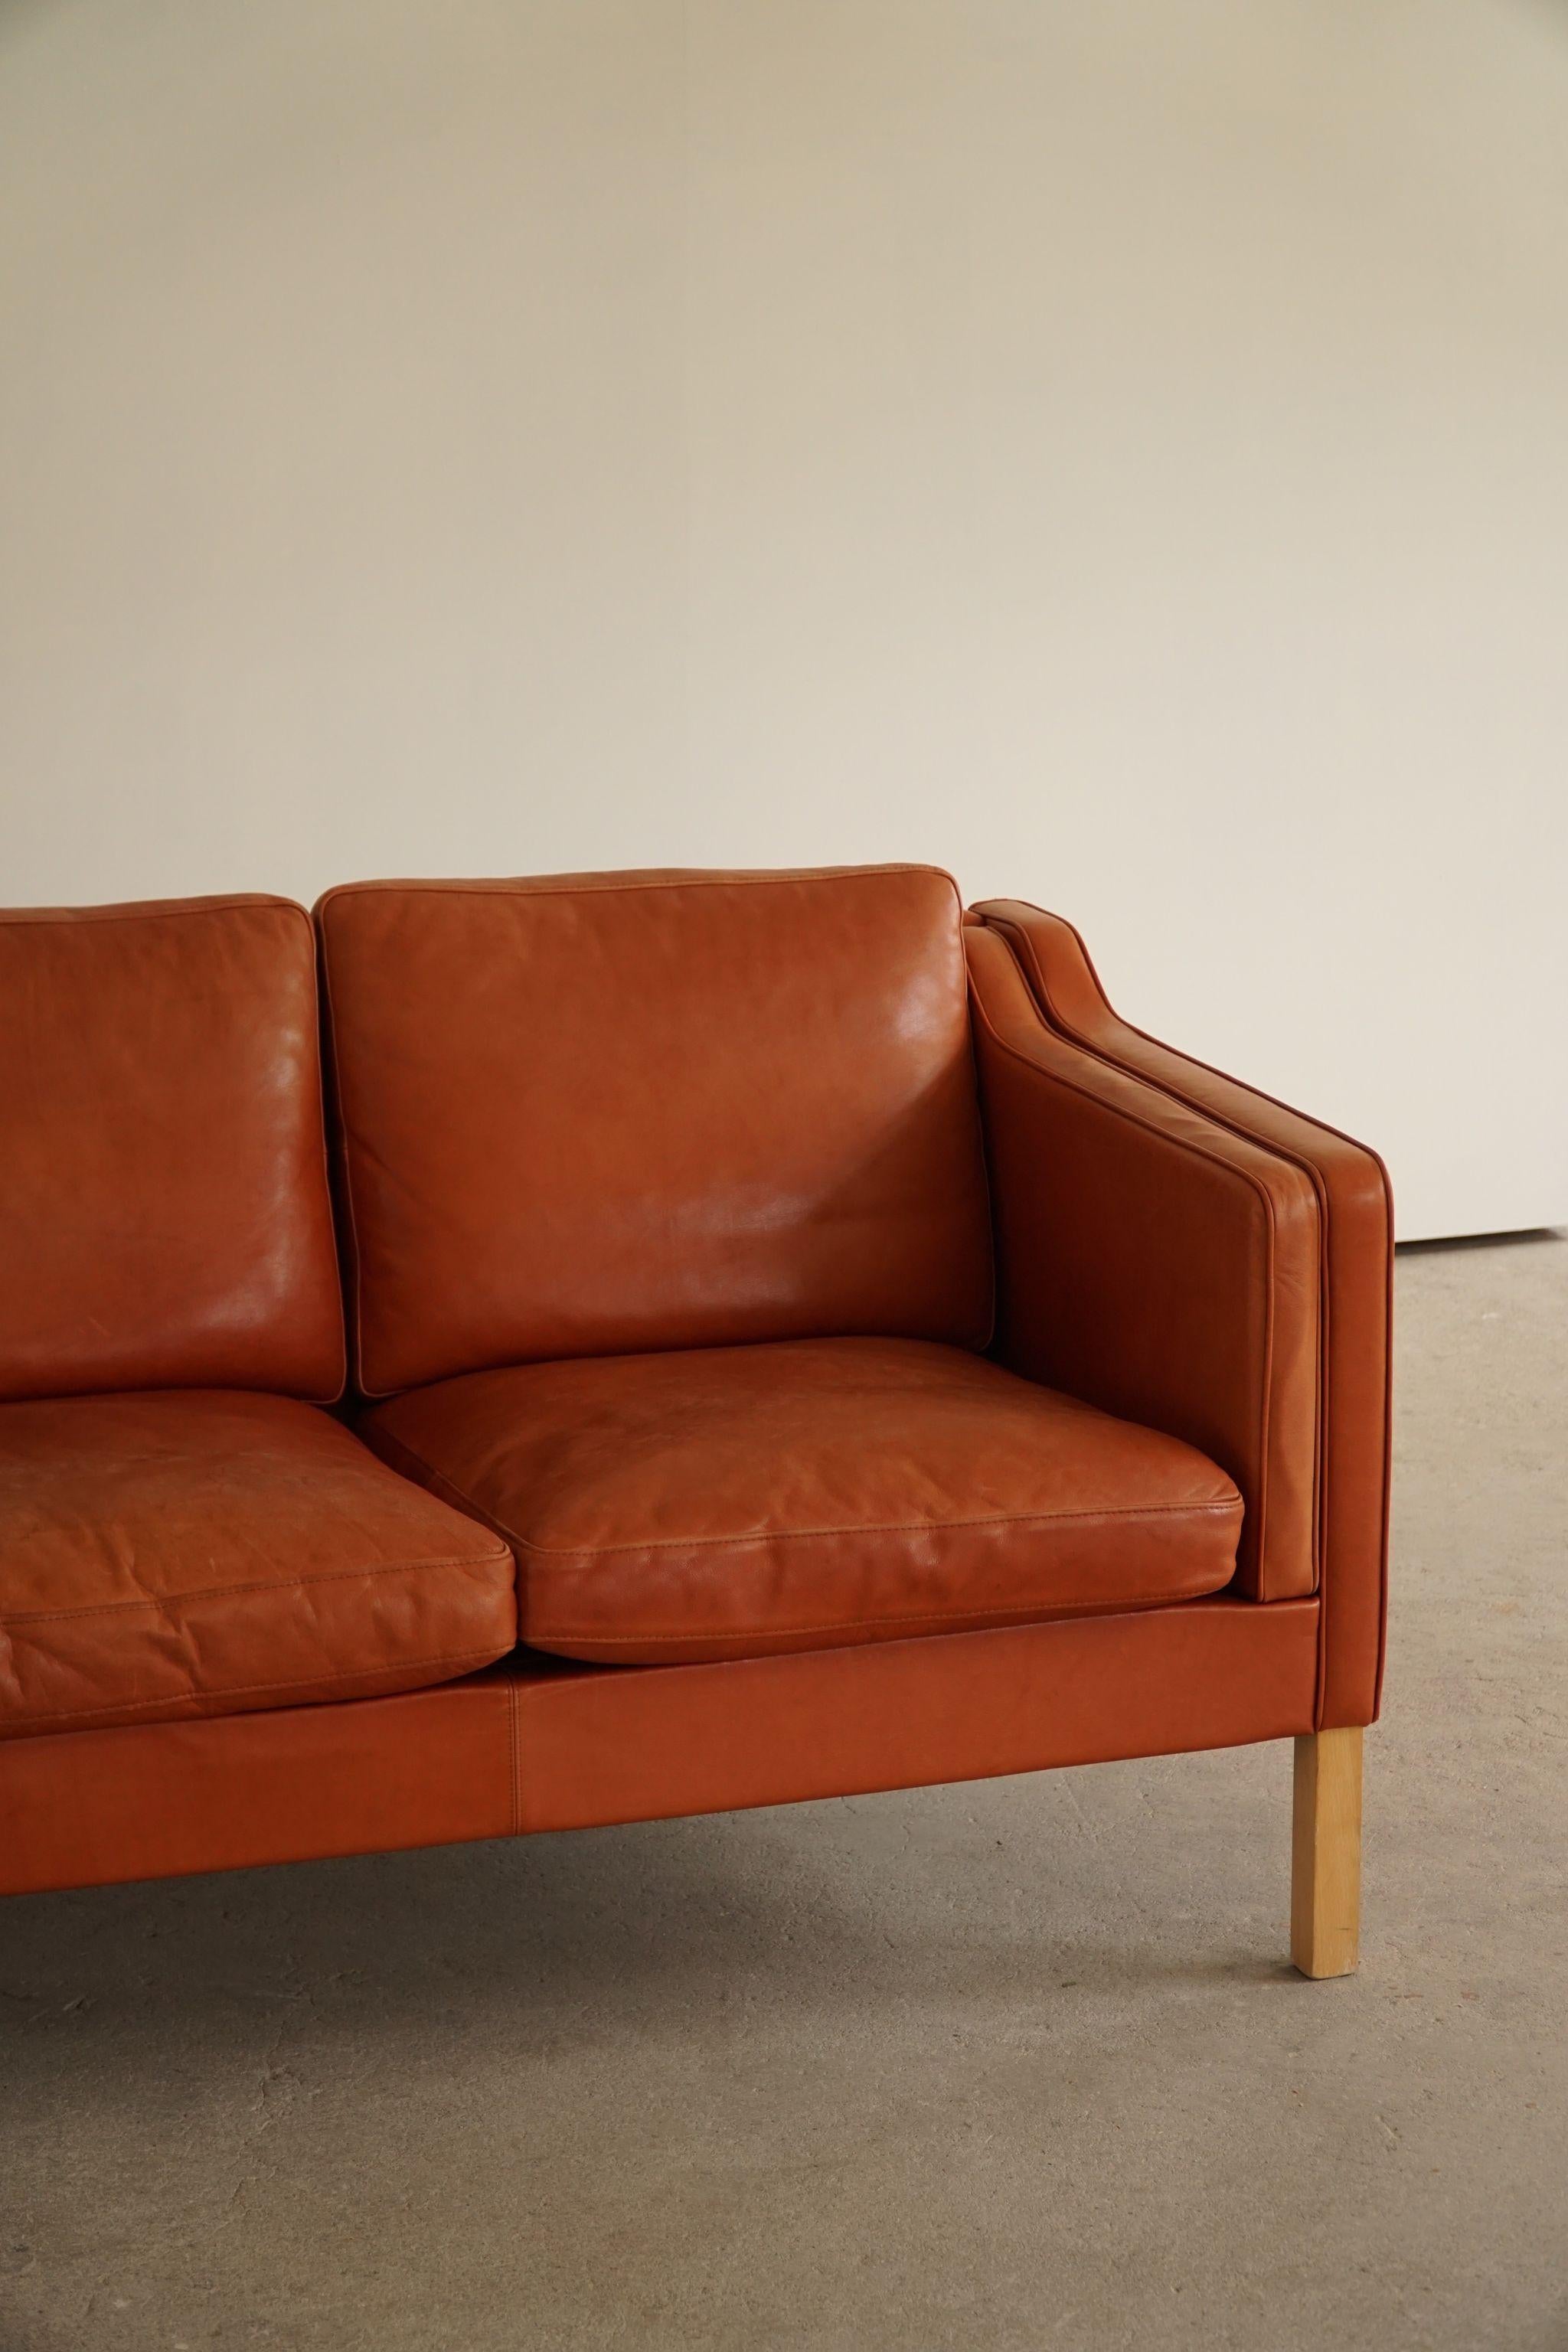 Classic Danish Mid Century Two Seater Sofa in Cognac Leather, Made in 1970s 2